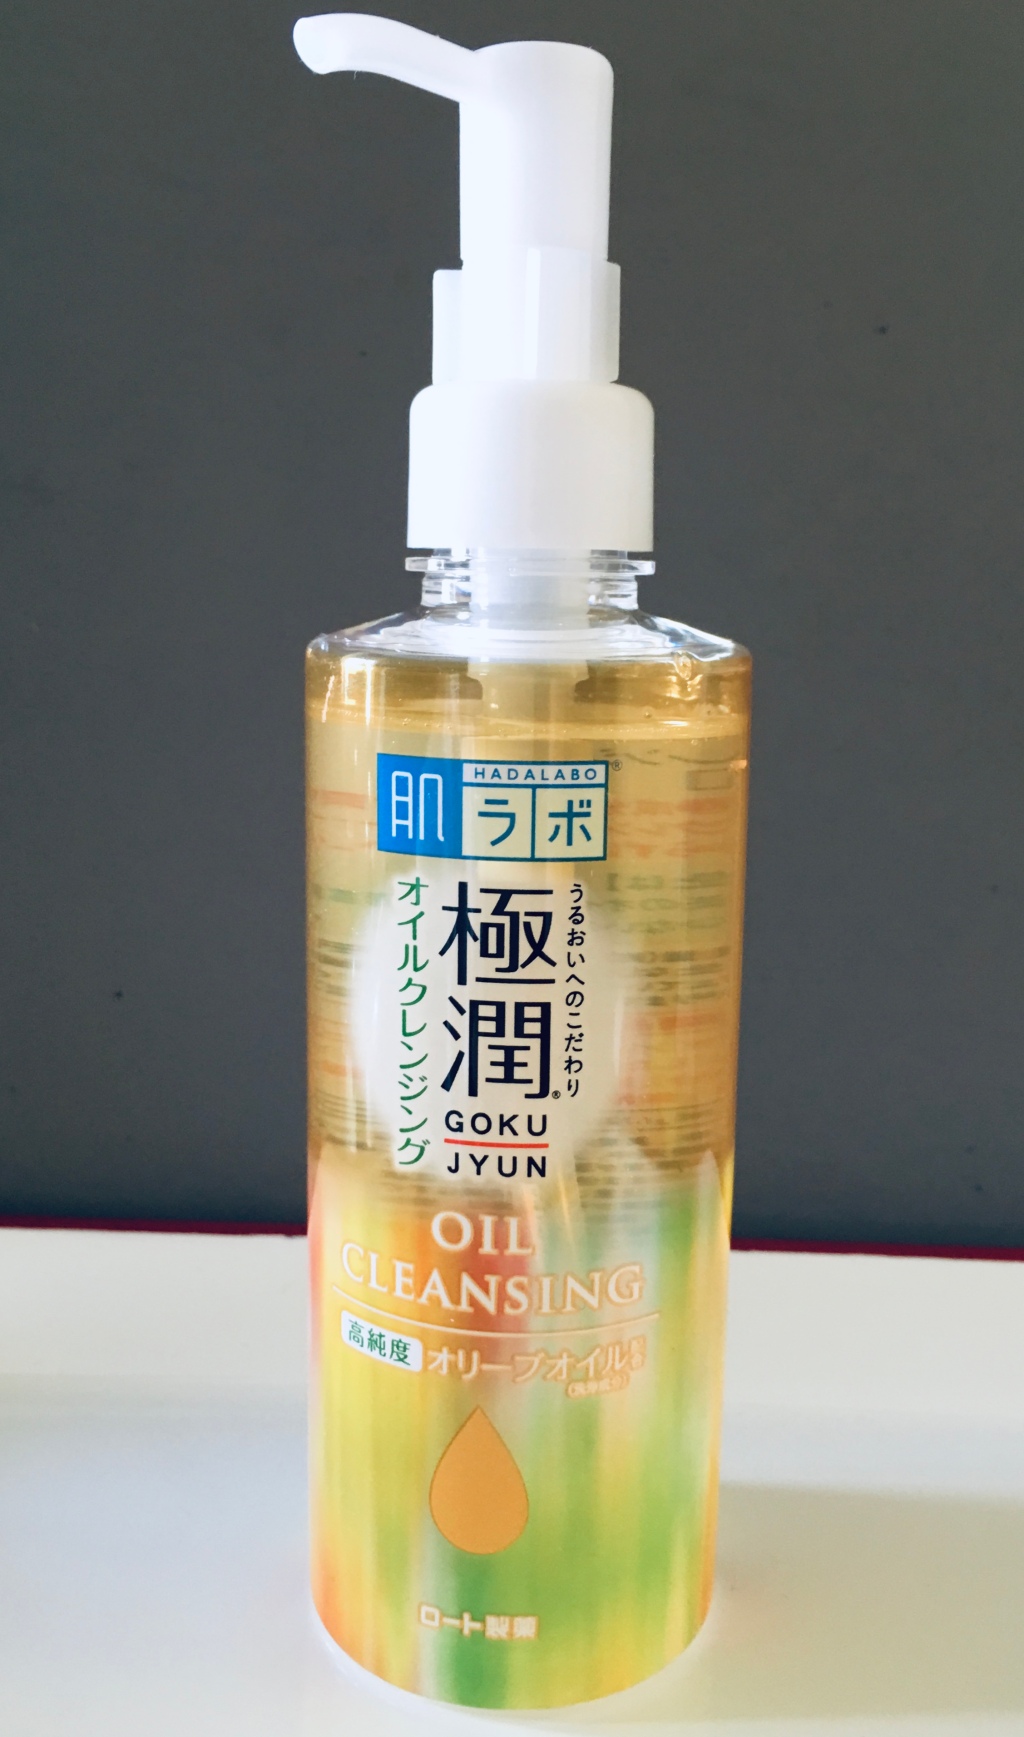 Hada Labo Gokujyun Oil Cleansing – Review